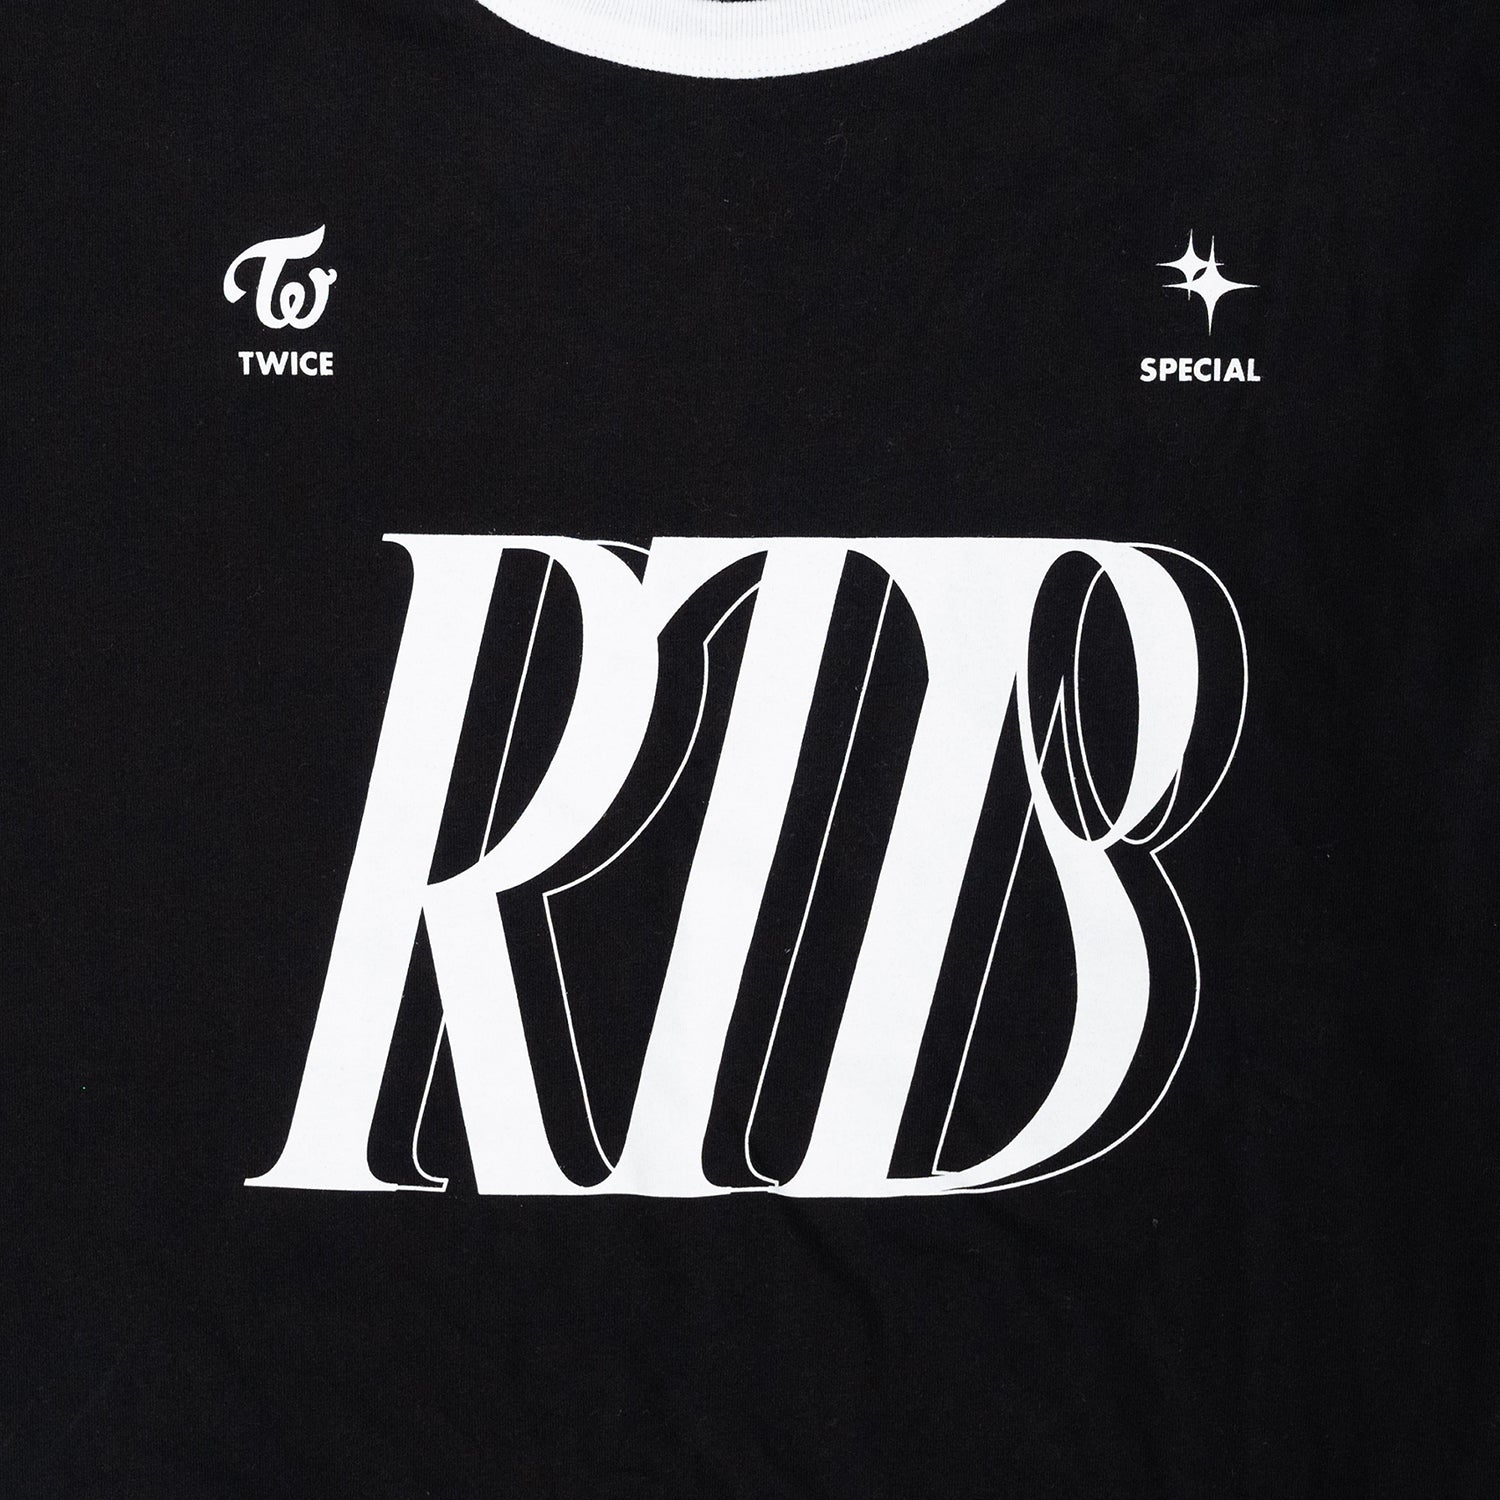 T-SHIRT / BLACK【S】/ TWICE『READY TO BE SPECIAL』